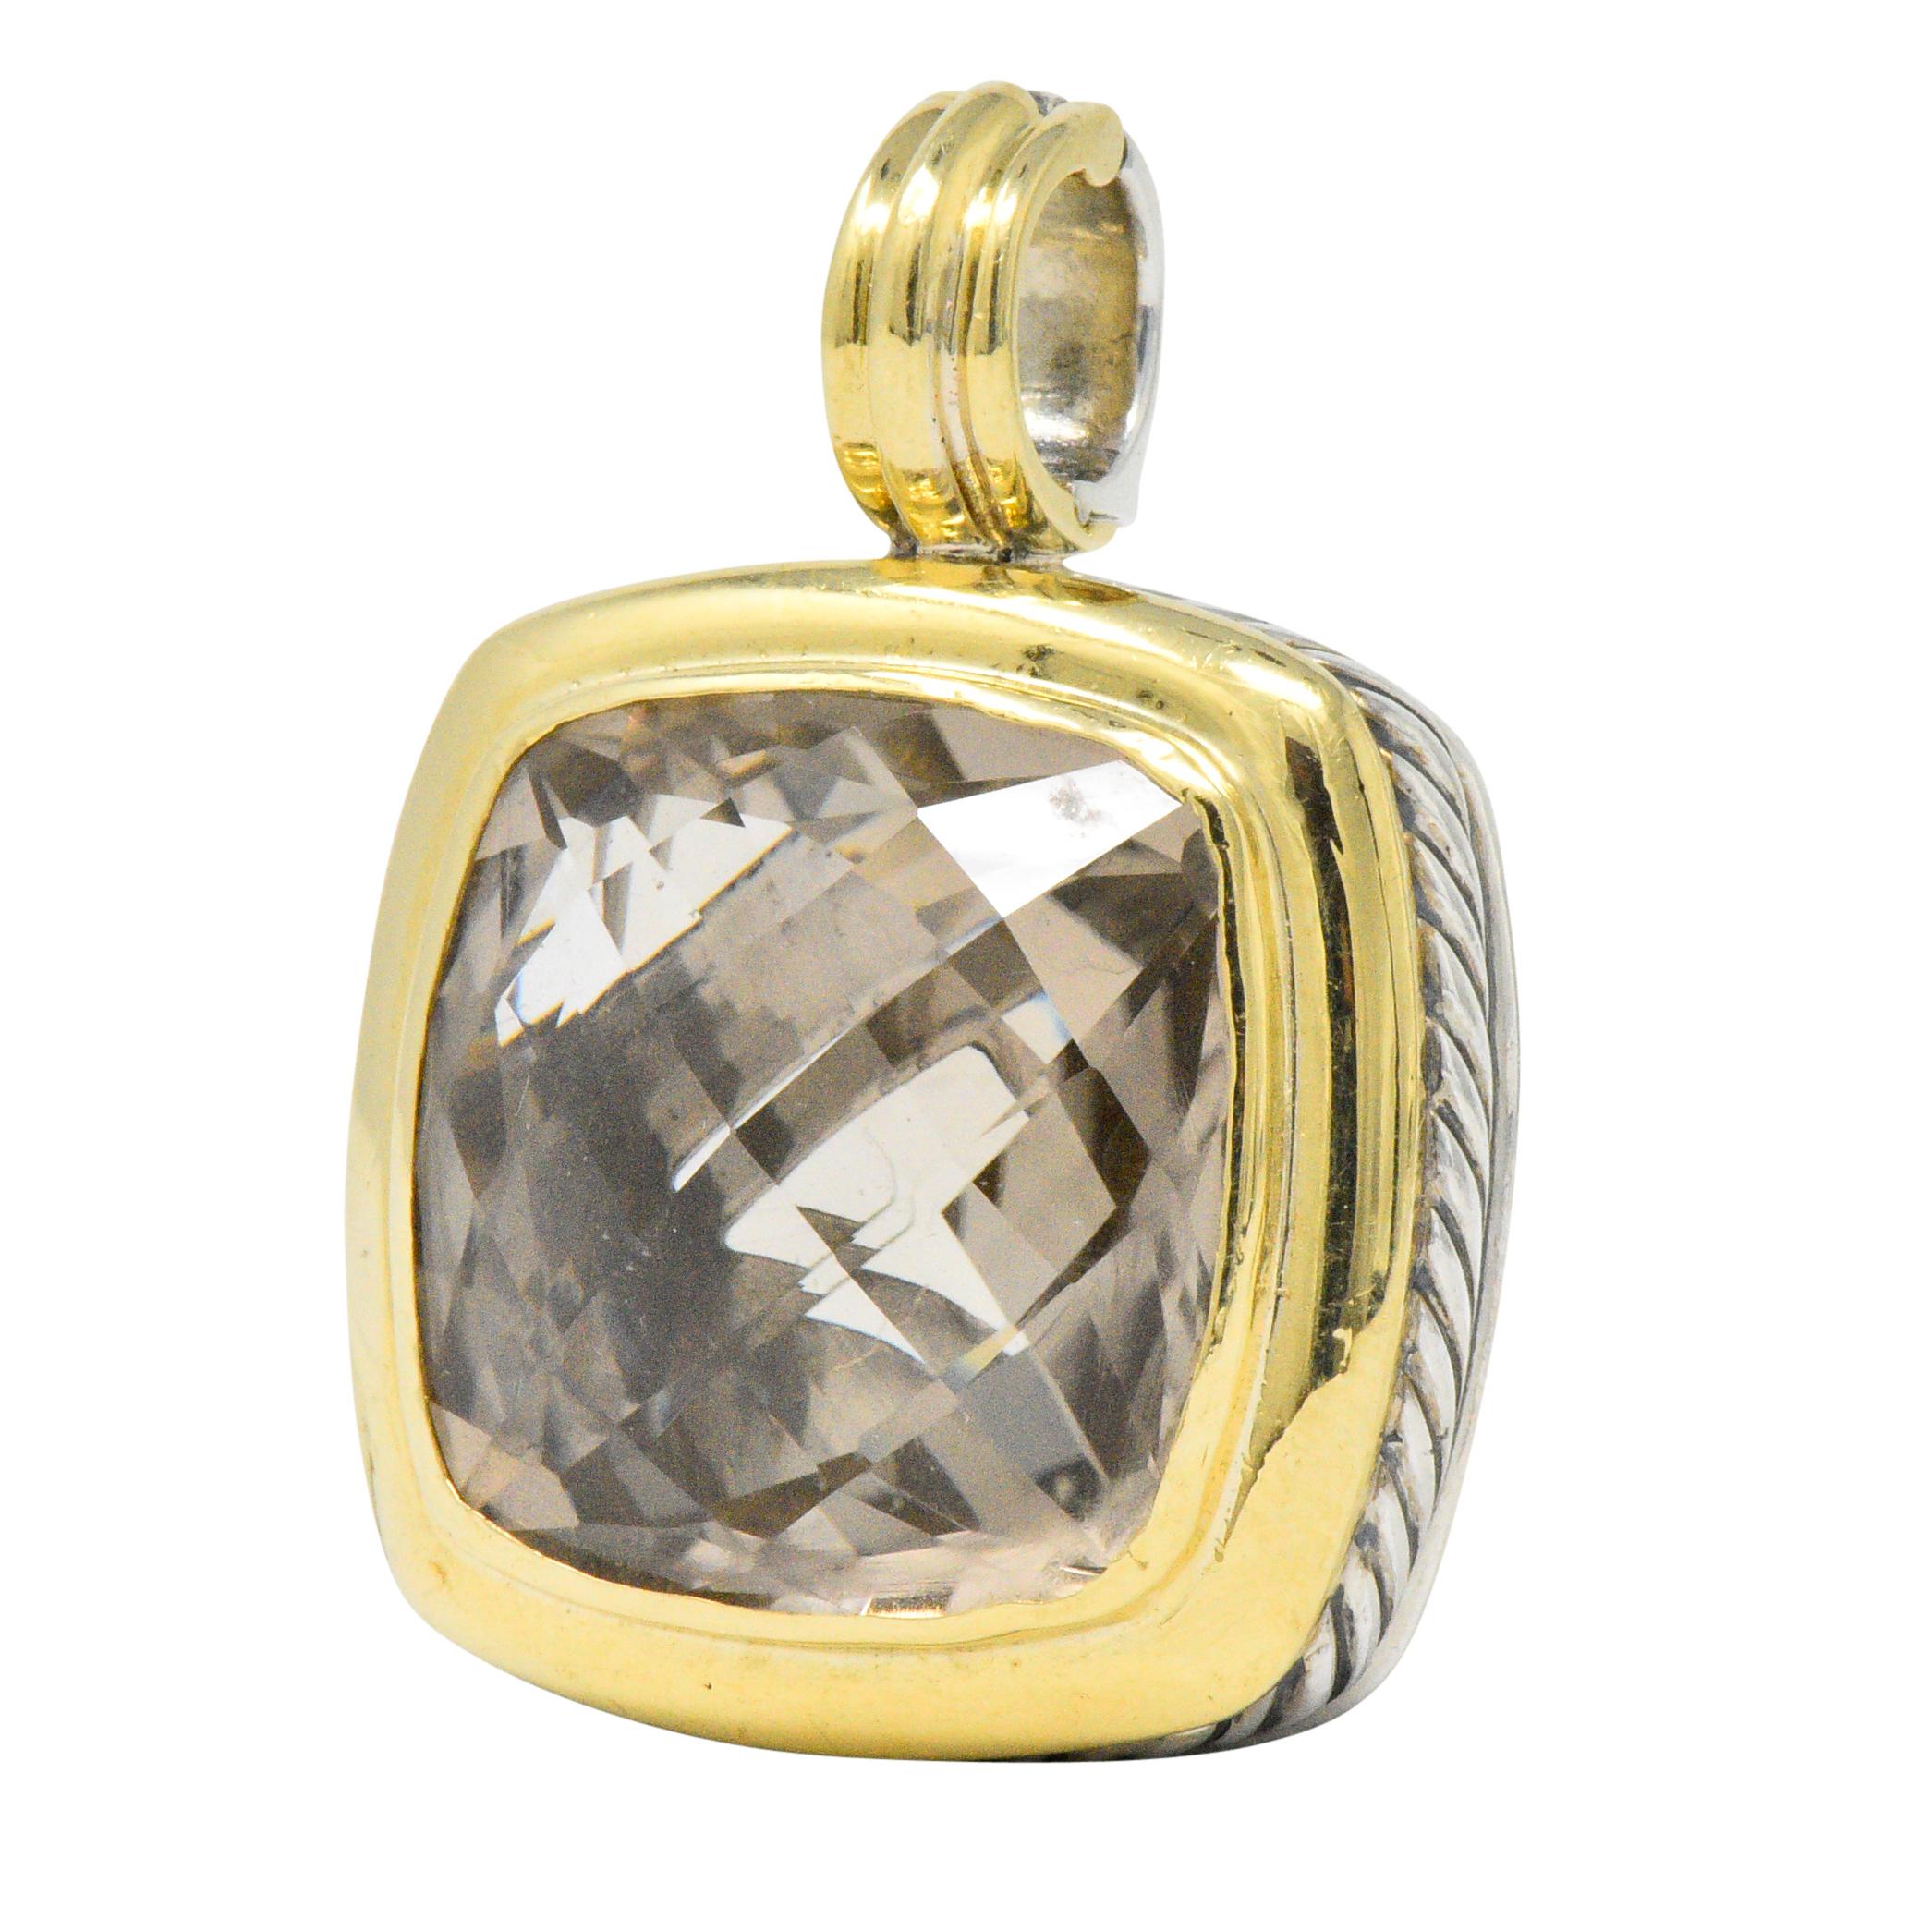 Centering a square checkerboard cut smoky quartz, light brown with a hint of pink, measuring approximately 20.0 x 20.0 mm

Polished gold bezel and twisted silver detail

Hinged bale

Signed D.Y.

Measures: 1 1/2 x 1 Inch

Total Weight: 21.4